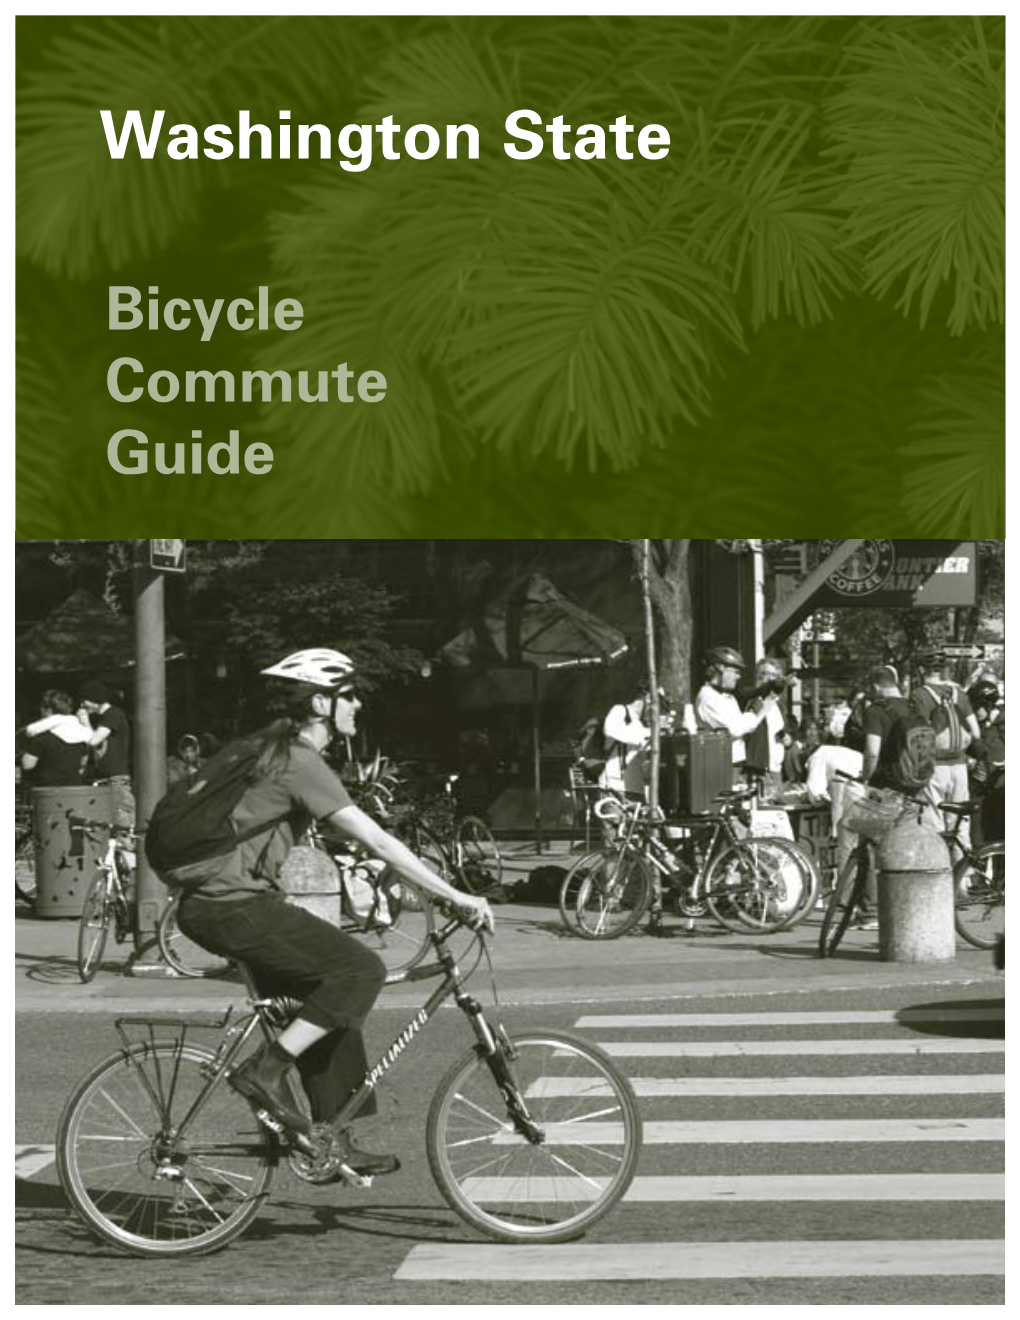 Washington State Bicycle Commuter Guide